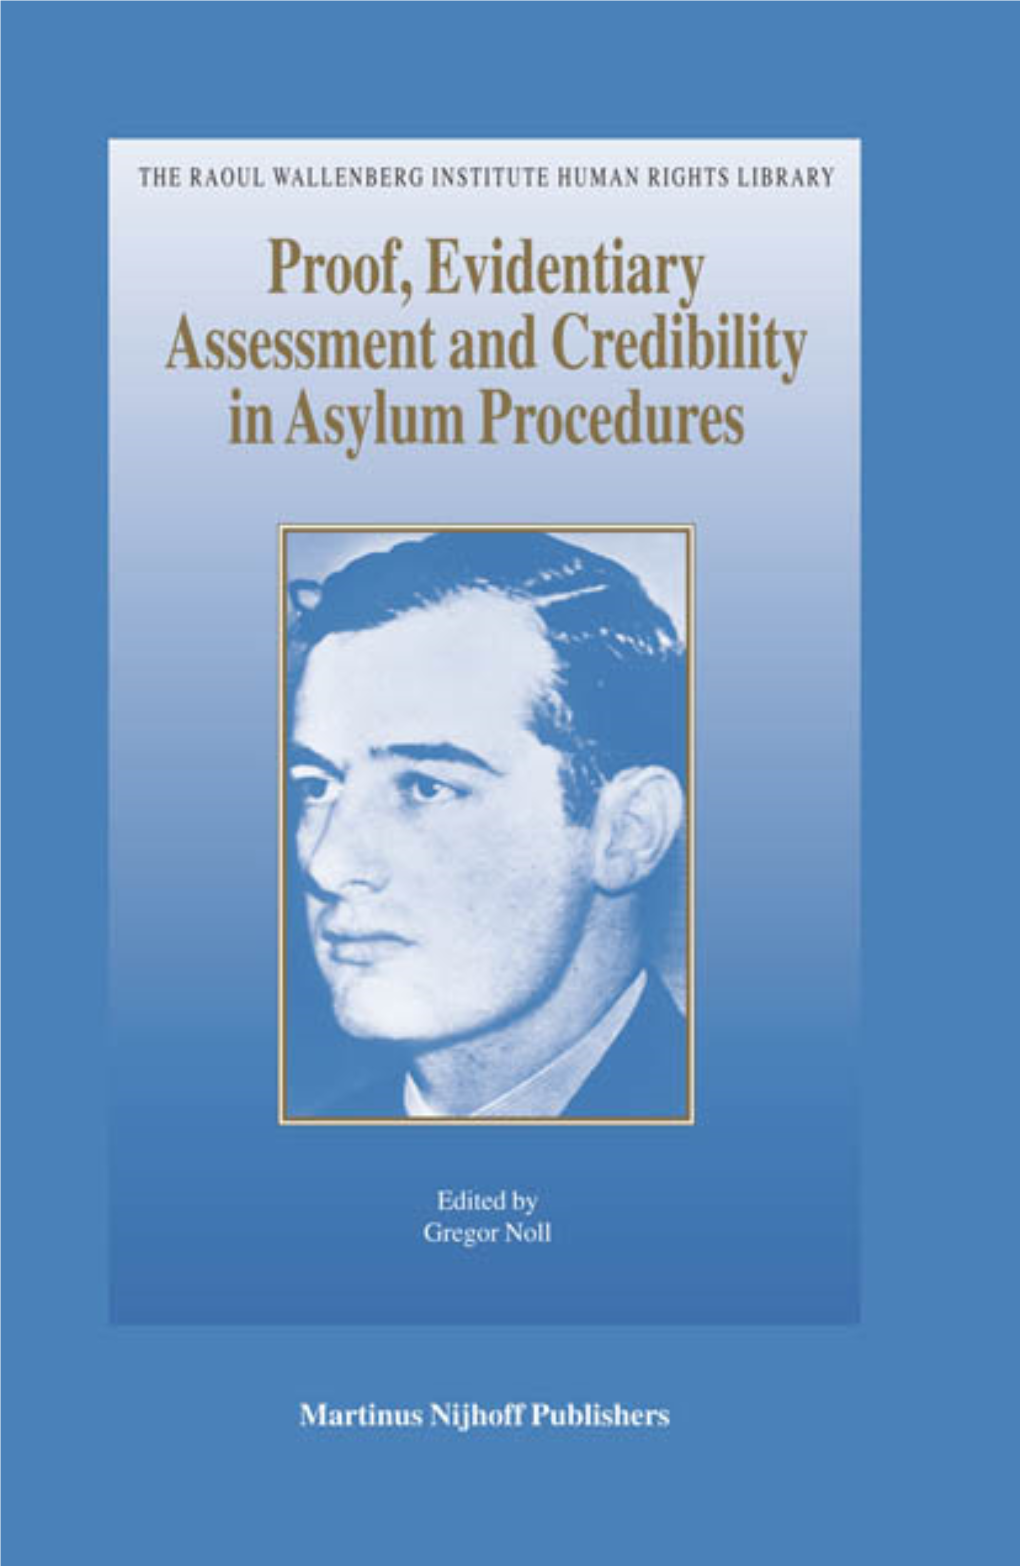 Proof, Evidentiary Assessment and Credibility in Asylum Procedures